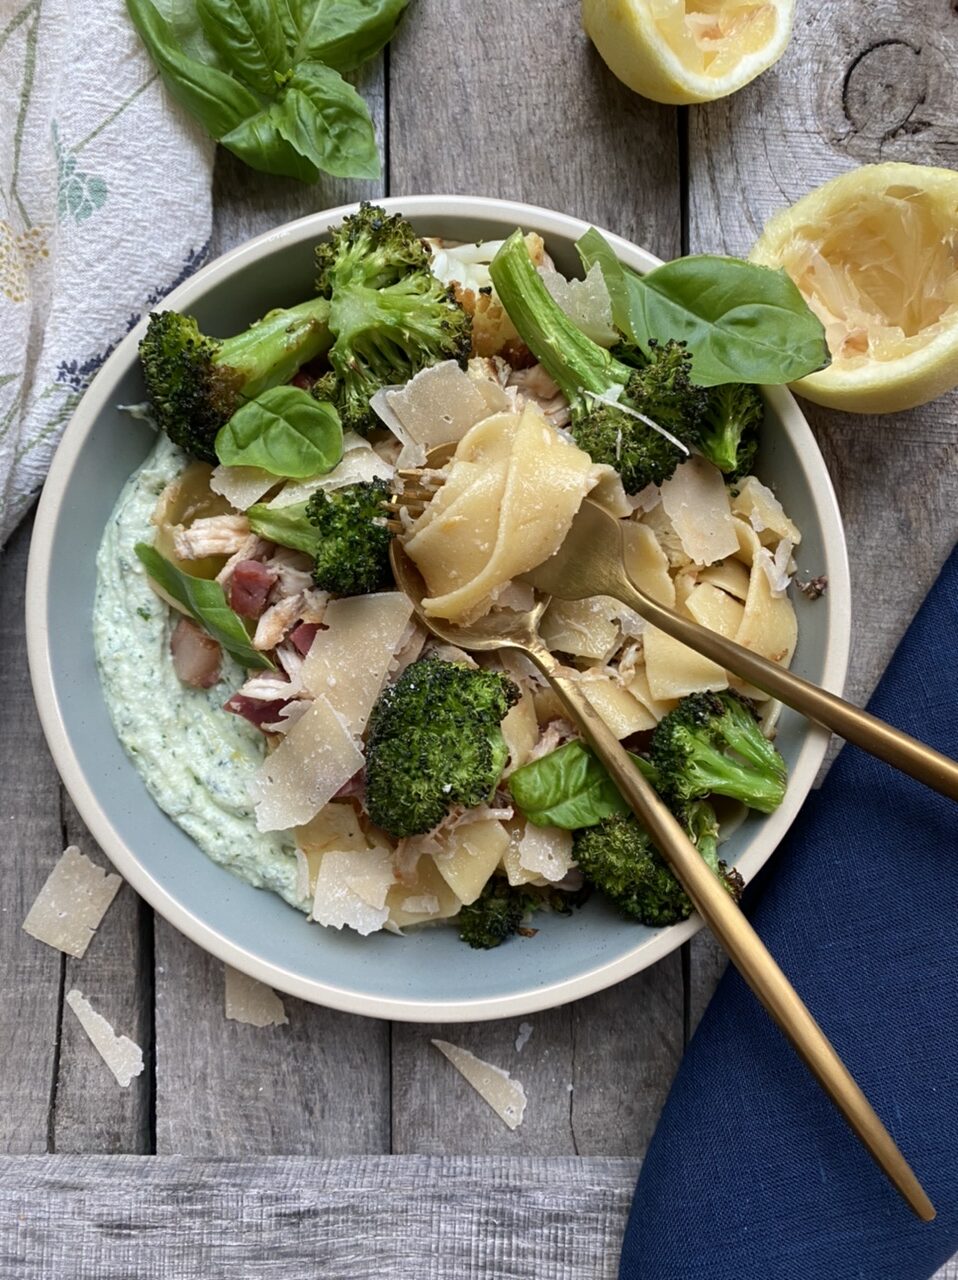 0E7B4395 172C 483A B23F FA563E60C0FD e1622650877596 - Browned Butter Pappardelle Chicken with Pancetta & Roast Broccoli on Herbed Whipped Ricotta